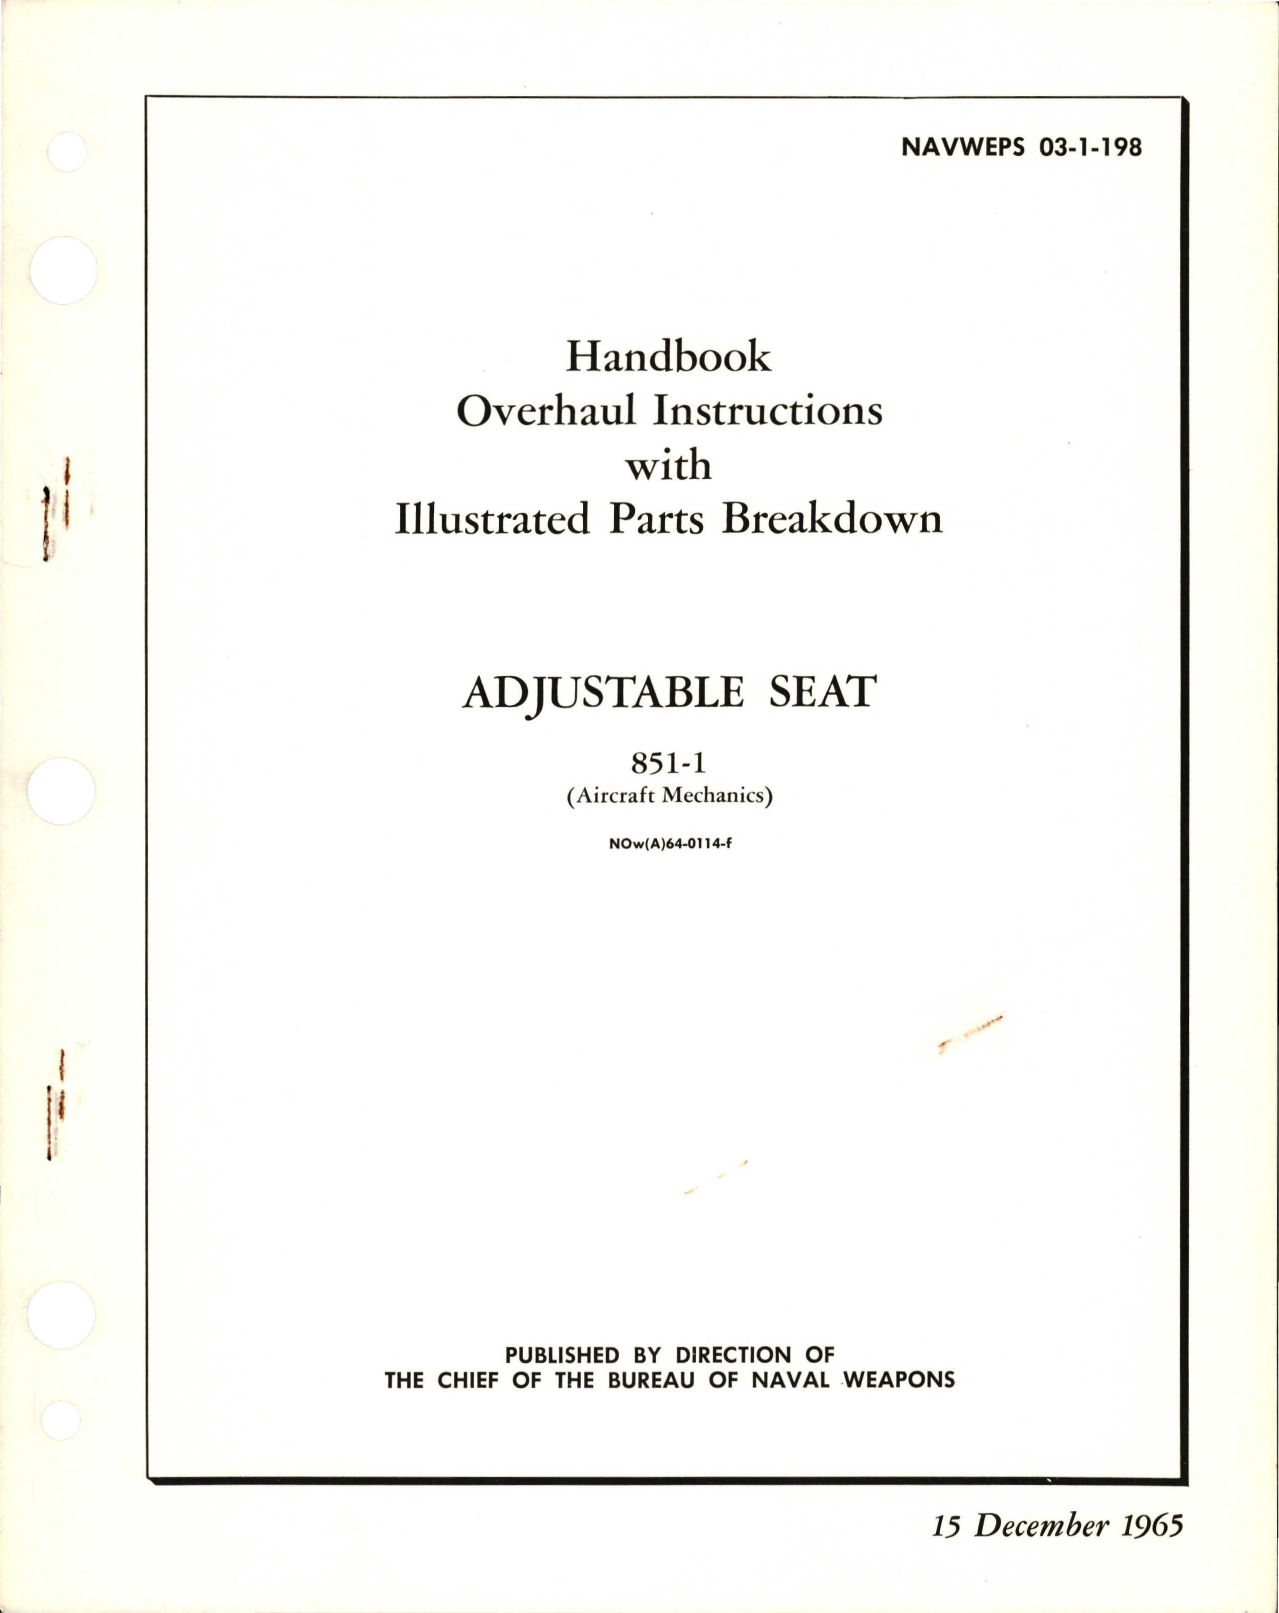 Sample page 1 from AirCorps Library document: Overhaul Instructions with Illustrated Parts Breakdown for Adjustable Seat - 851-1